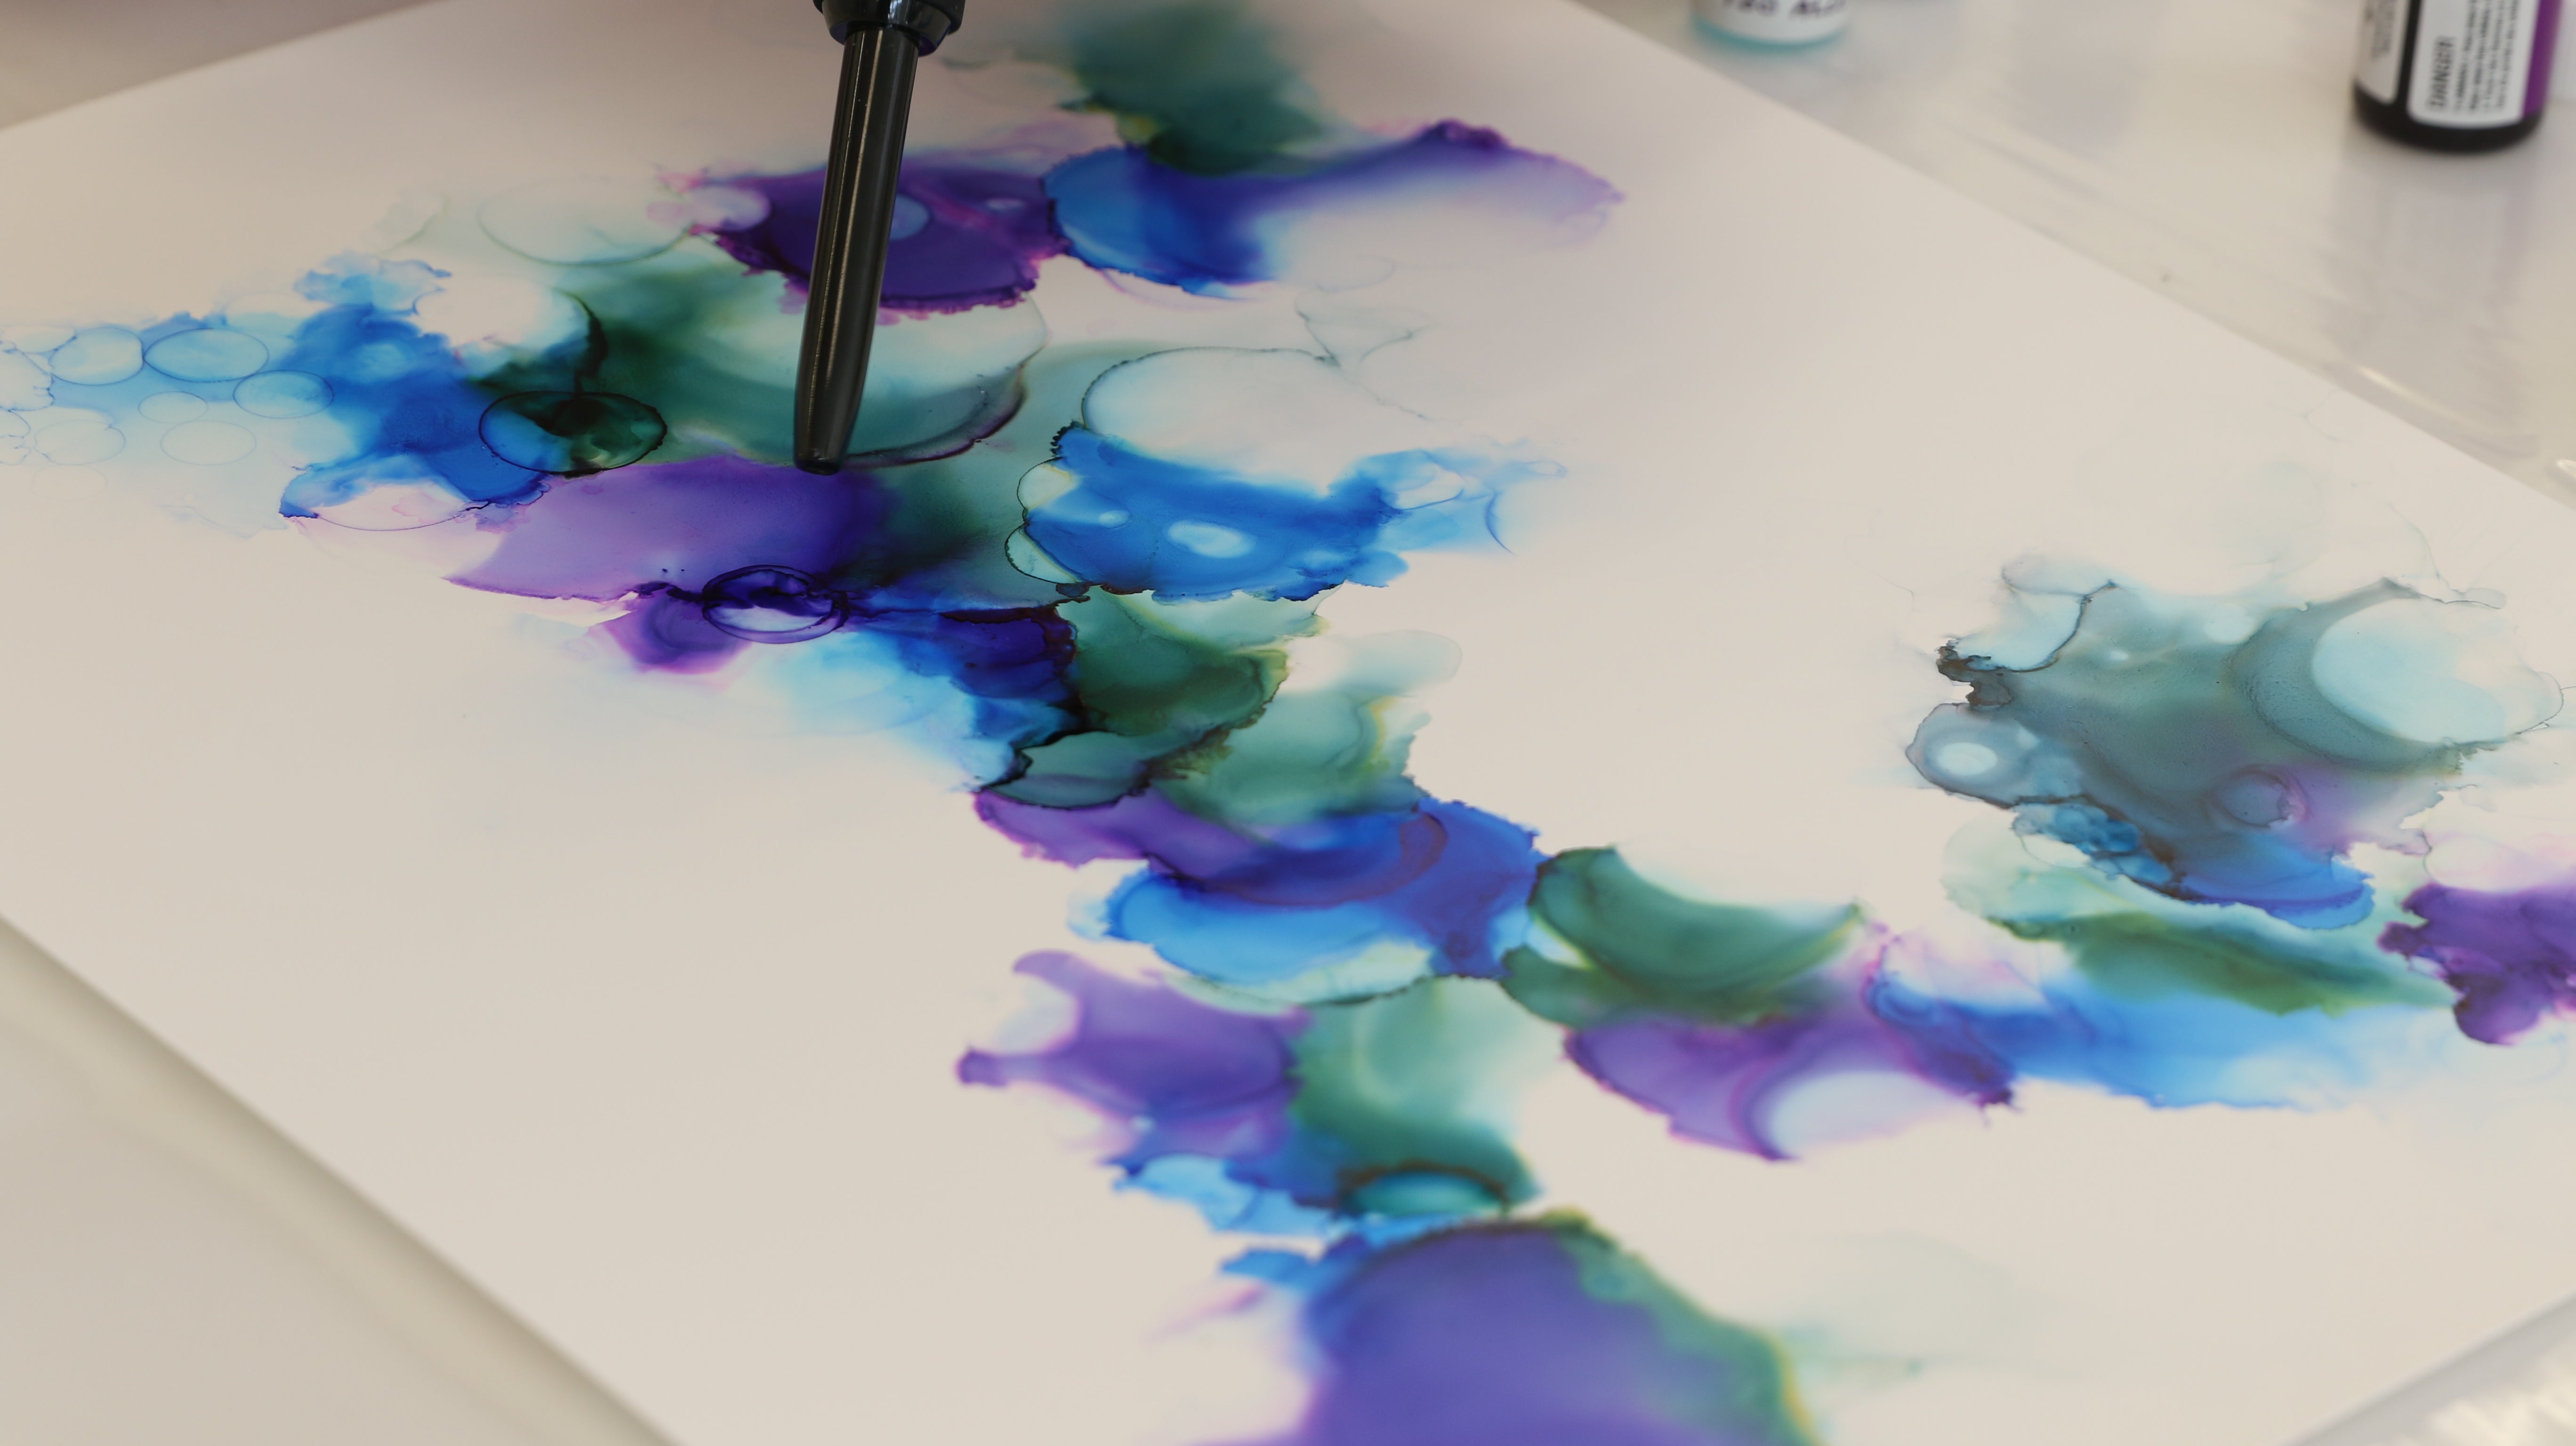 Alcohol Ink Art - What You Need to Know for Painting With Alcohol Ink